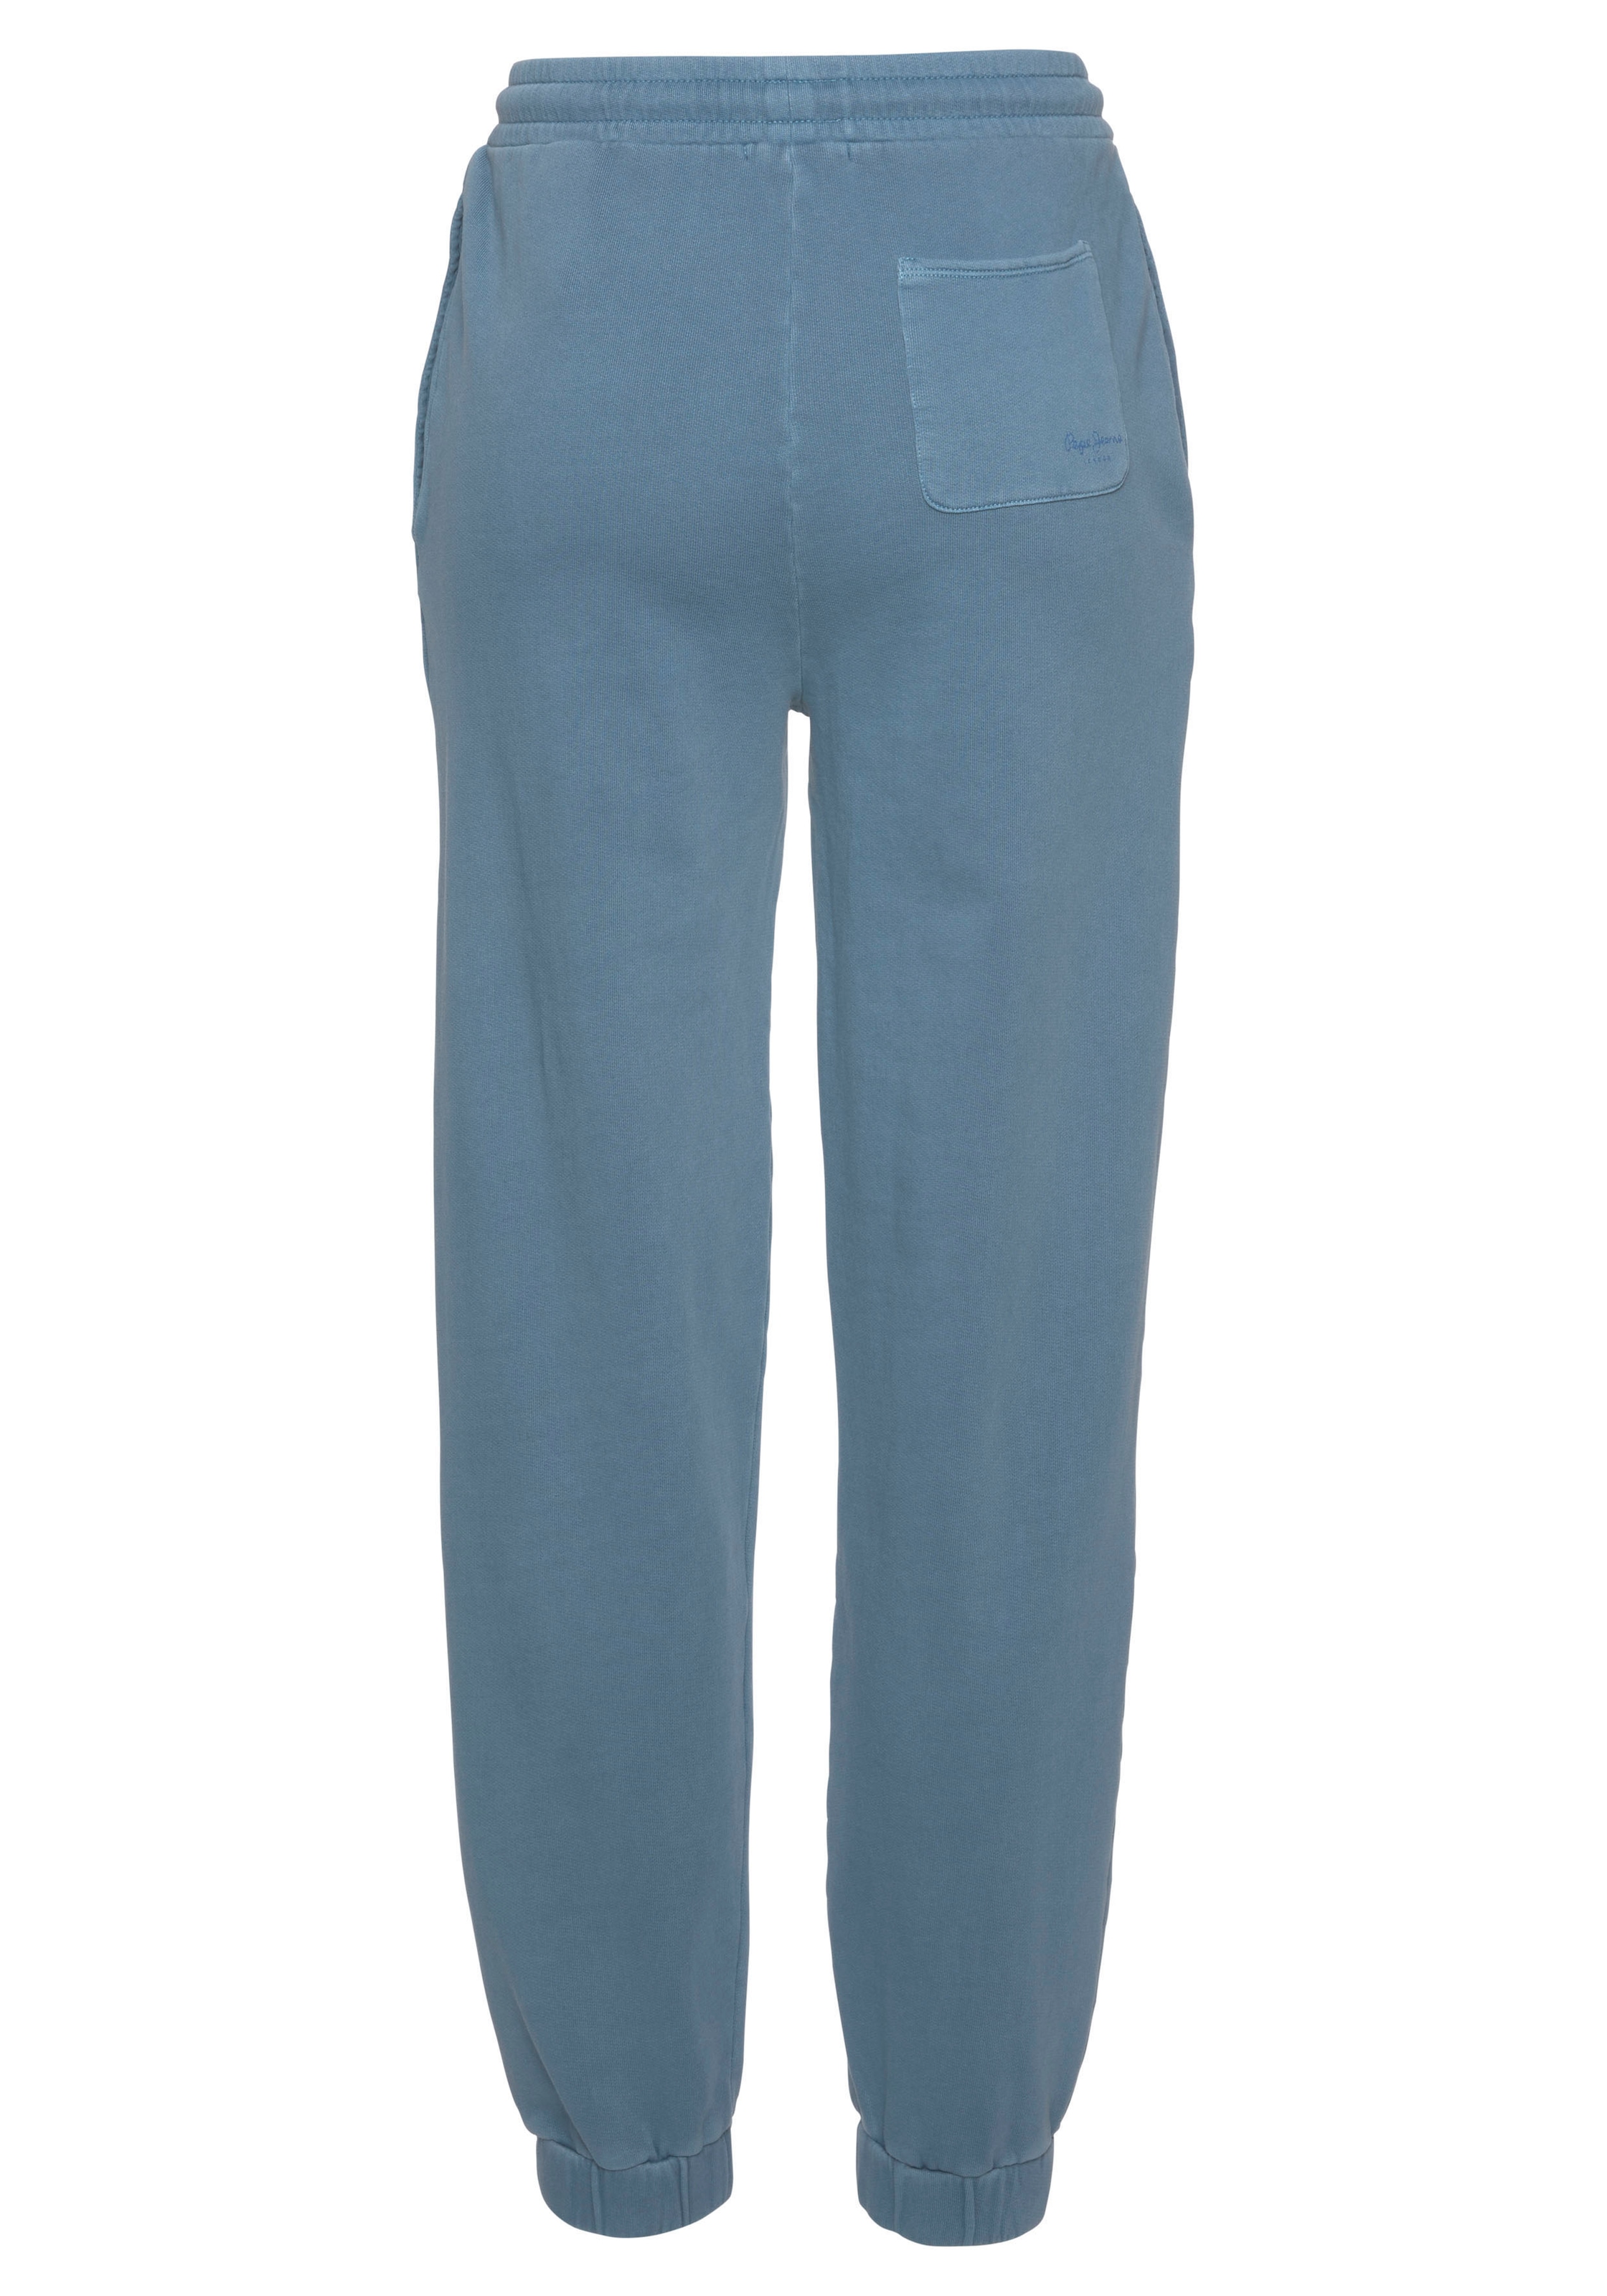 bei ♕ Pants Pepe Jogger Kordelzug mit Passform »AUDREY«, Jeans in entspannter